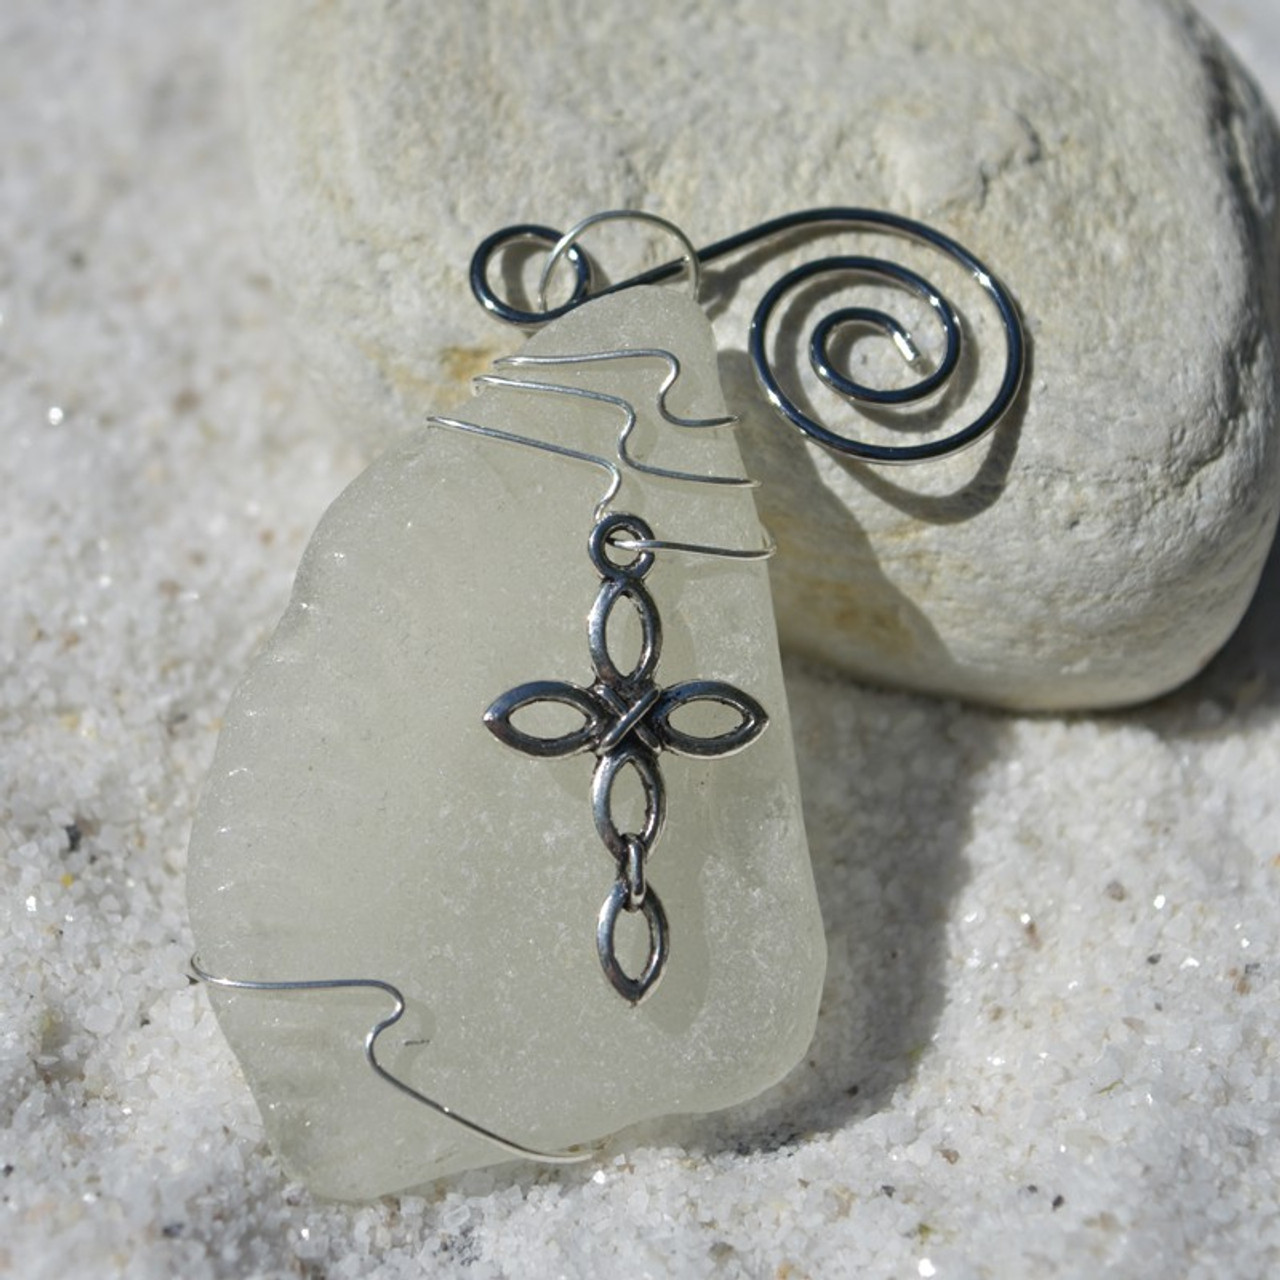 Ornate Silver Cross on a Surf Tumbled Sea Glass Ornament - Choose Your Color Sea Glass Frosted, Green, and Brown - Made to Order